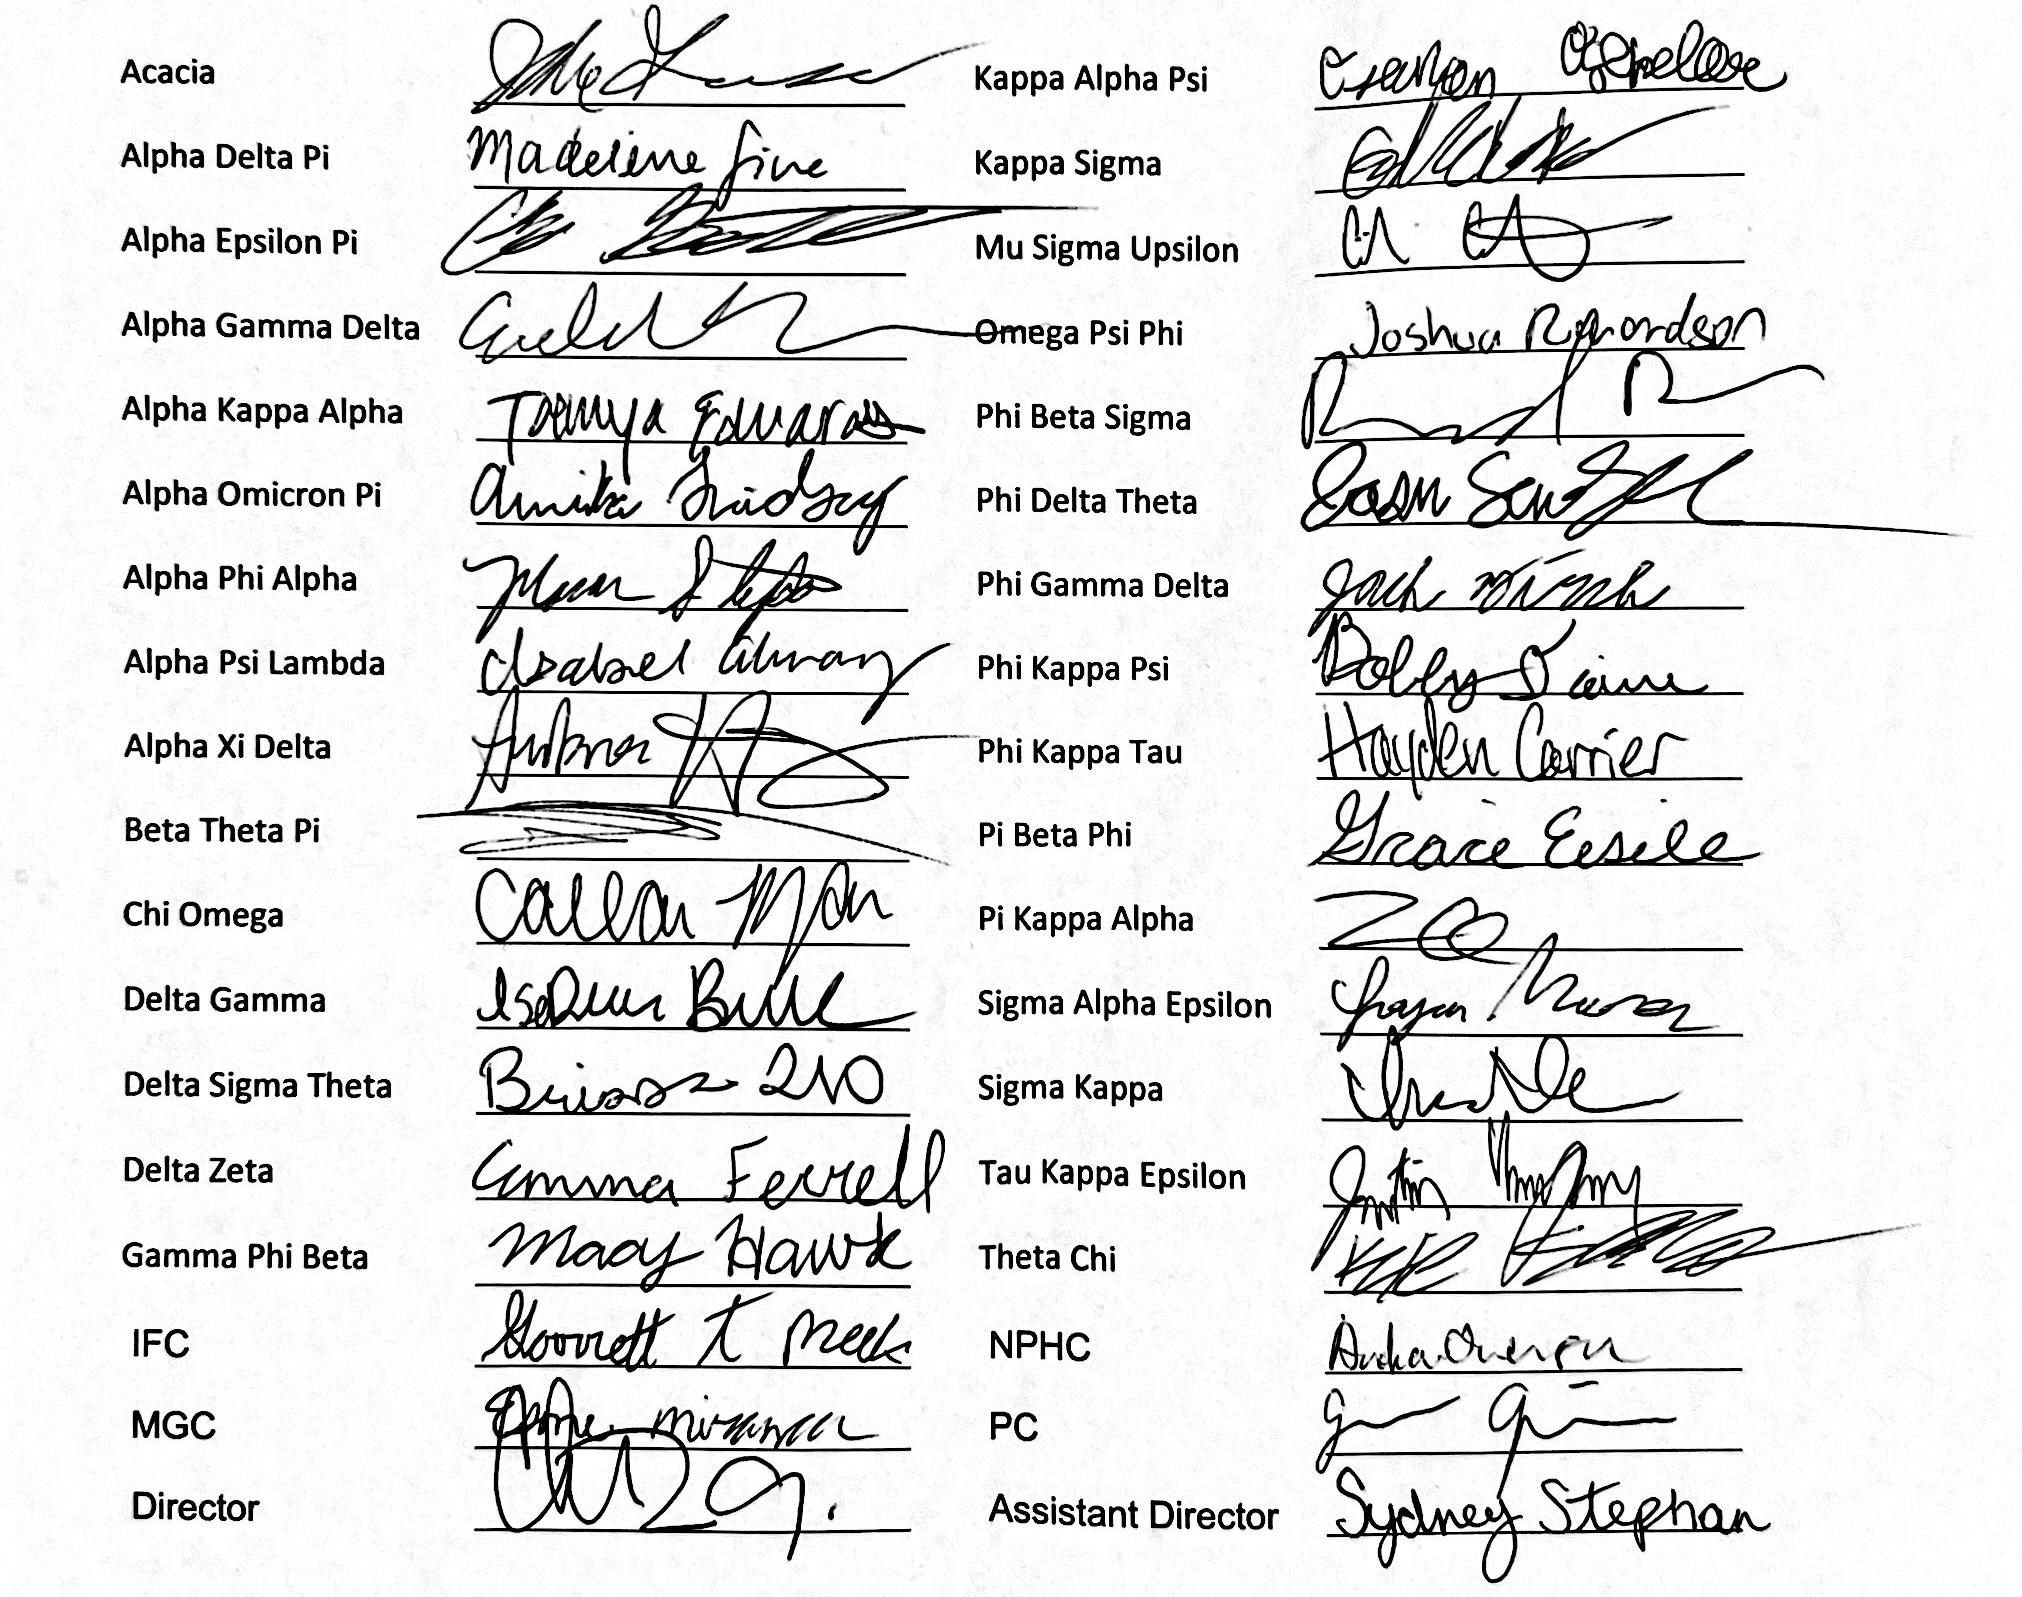 List of Signatures from all of our chapter presidents, council presidents, assistant director, and director of sorority and fraternity life